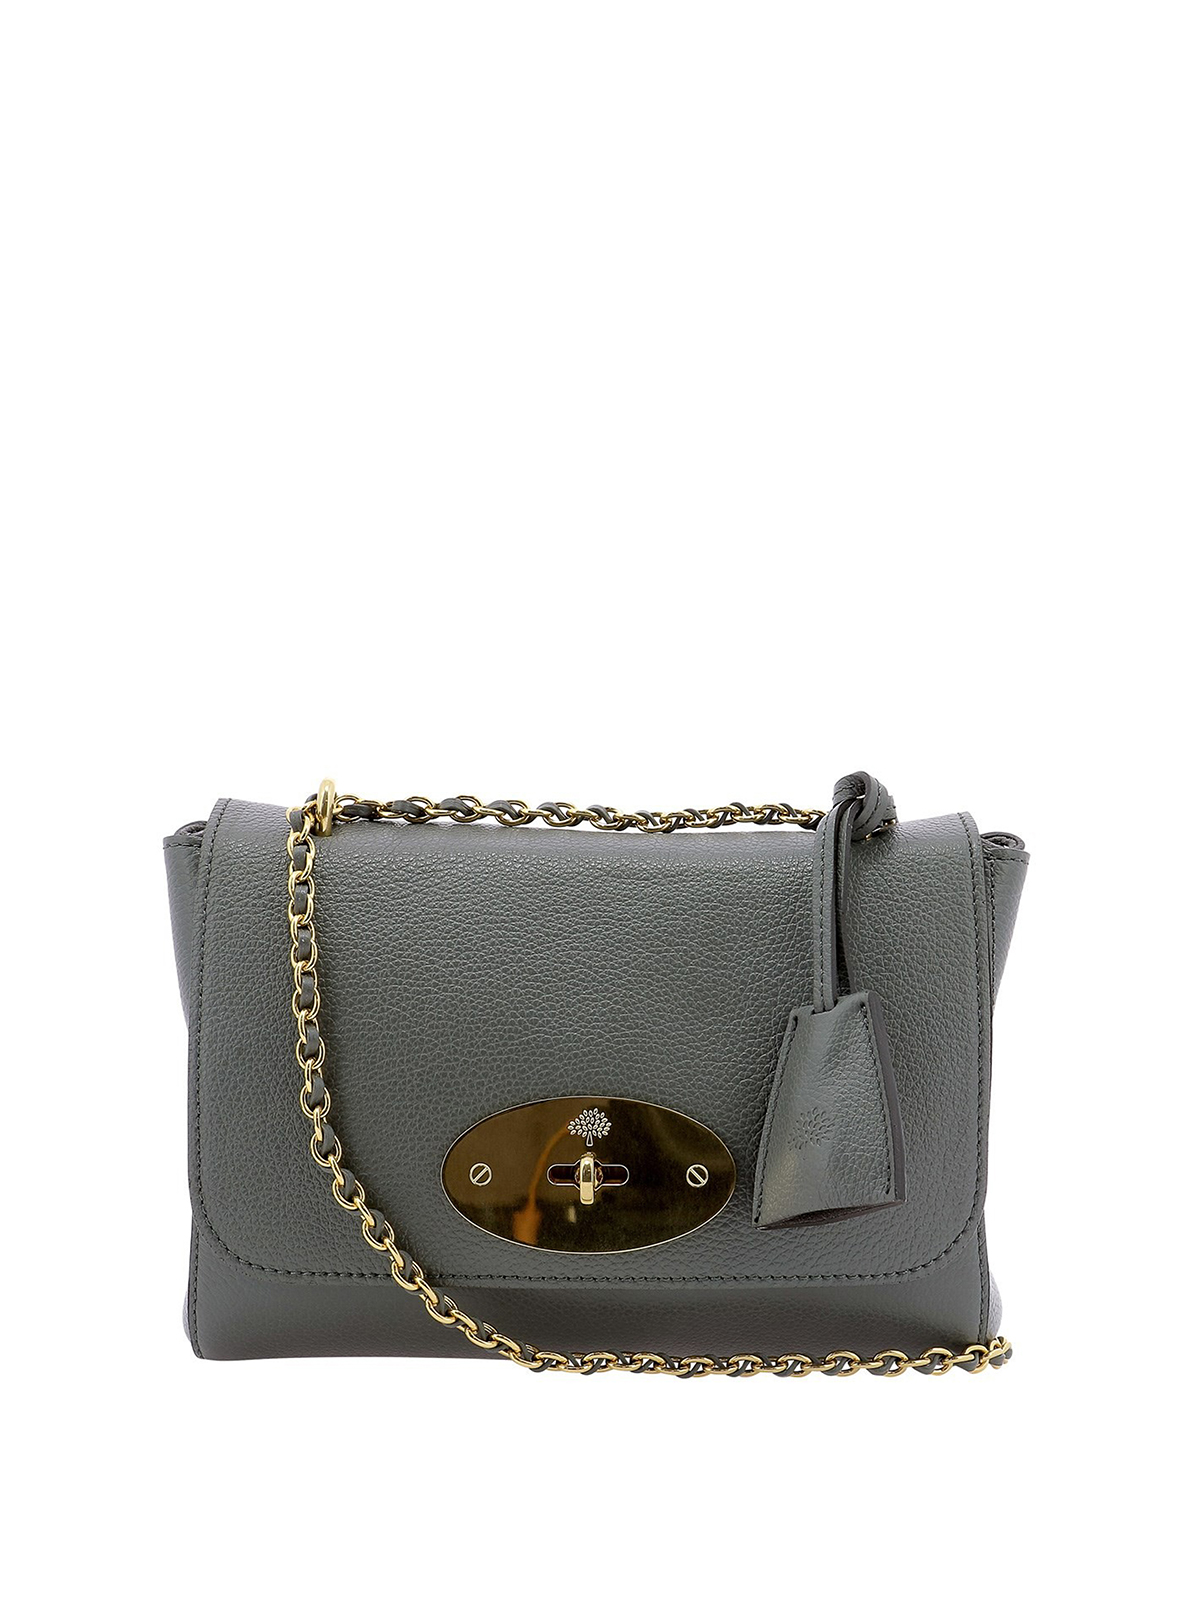 Mulberry Lily Small Bag In Grey